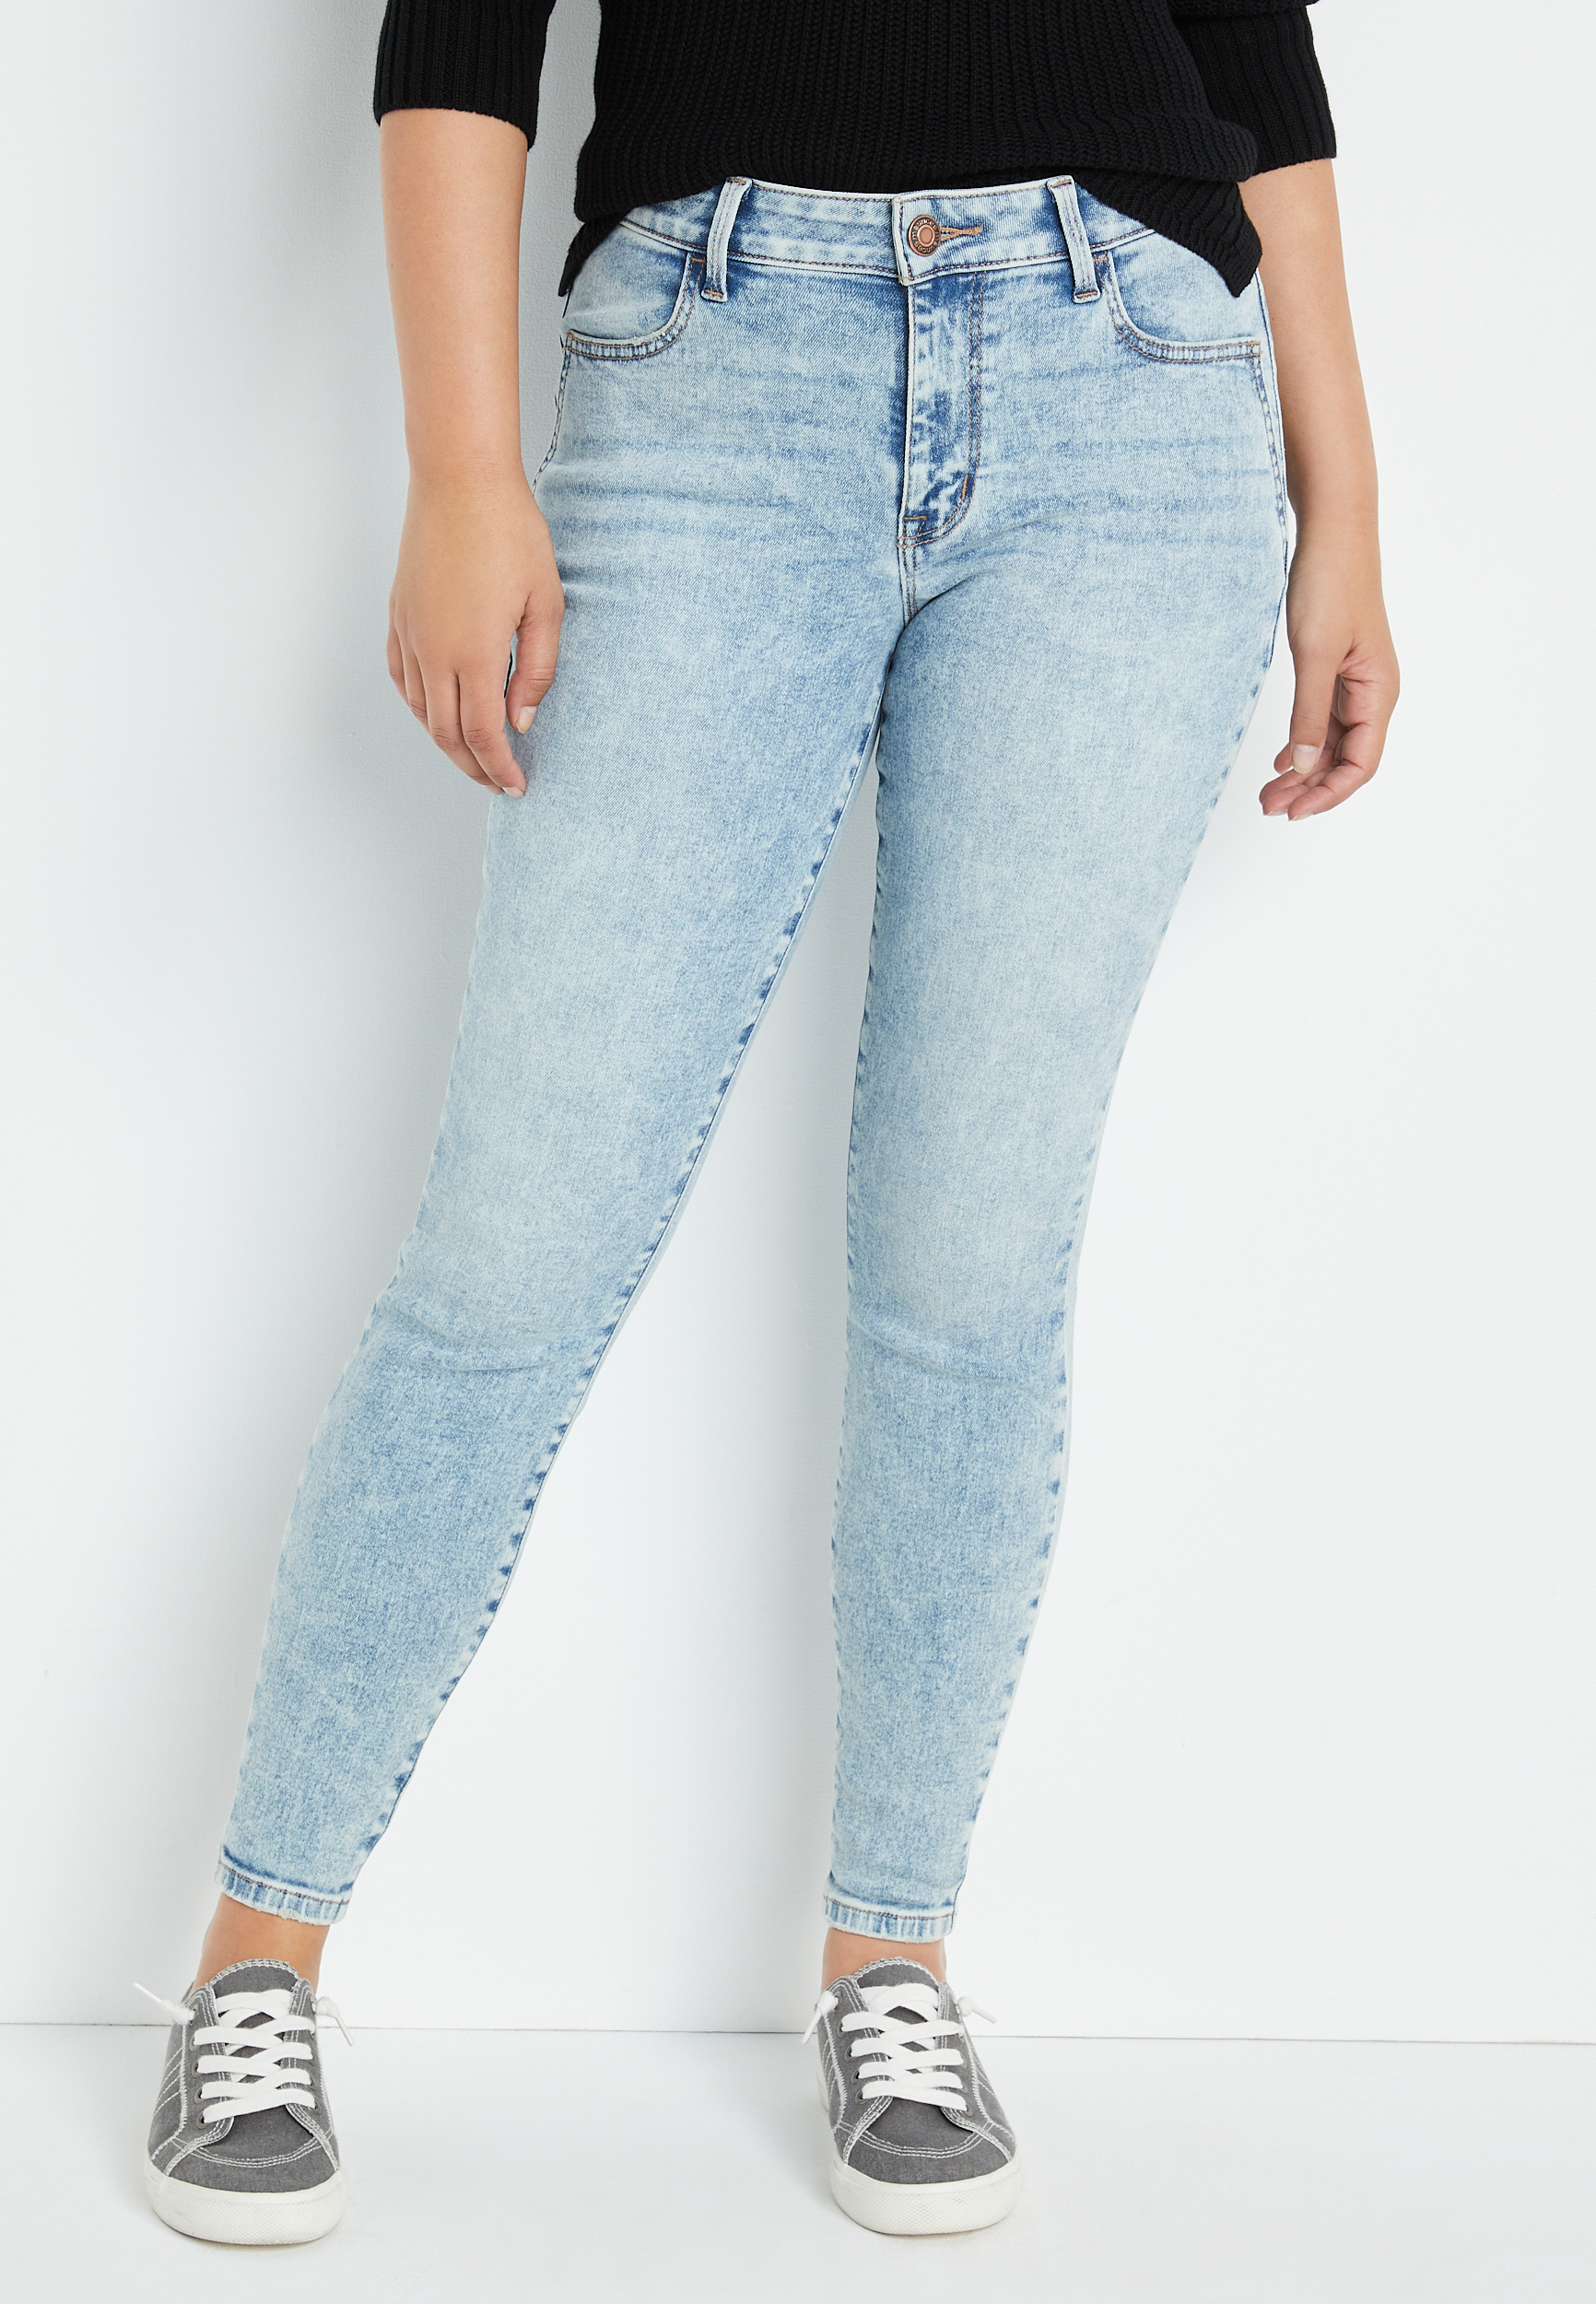 m jeans by mauricesâ¢ Vintage High Rise Jegging | maurices